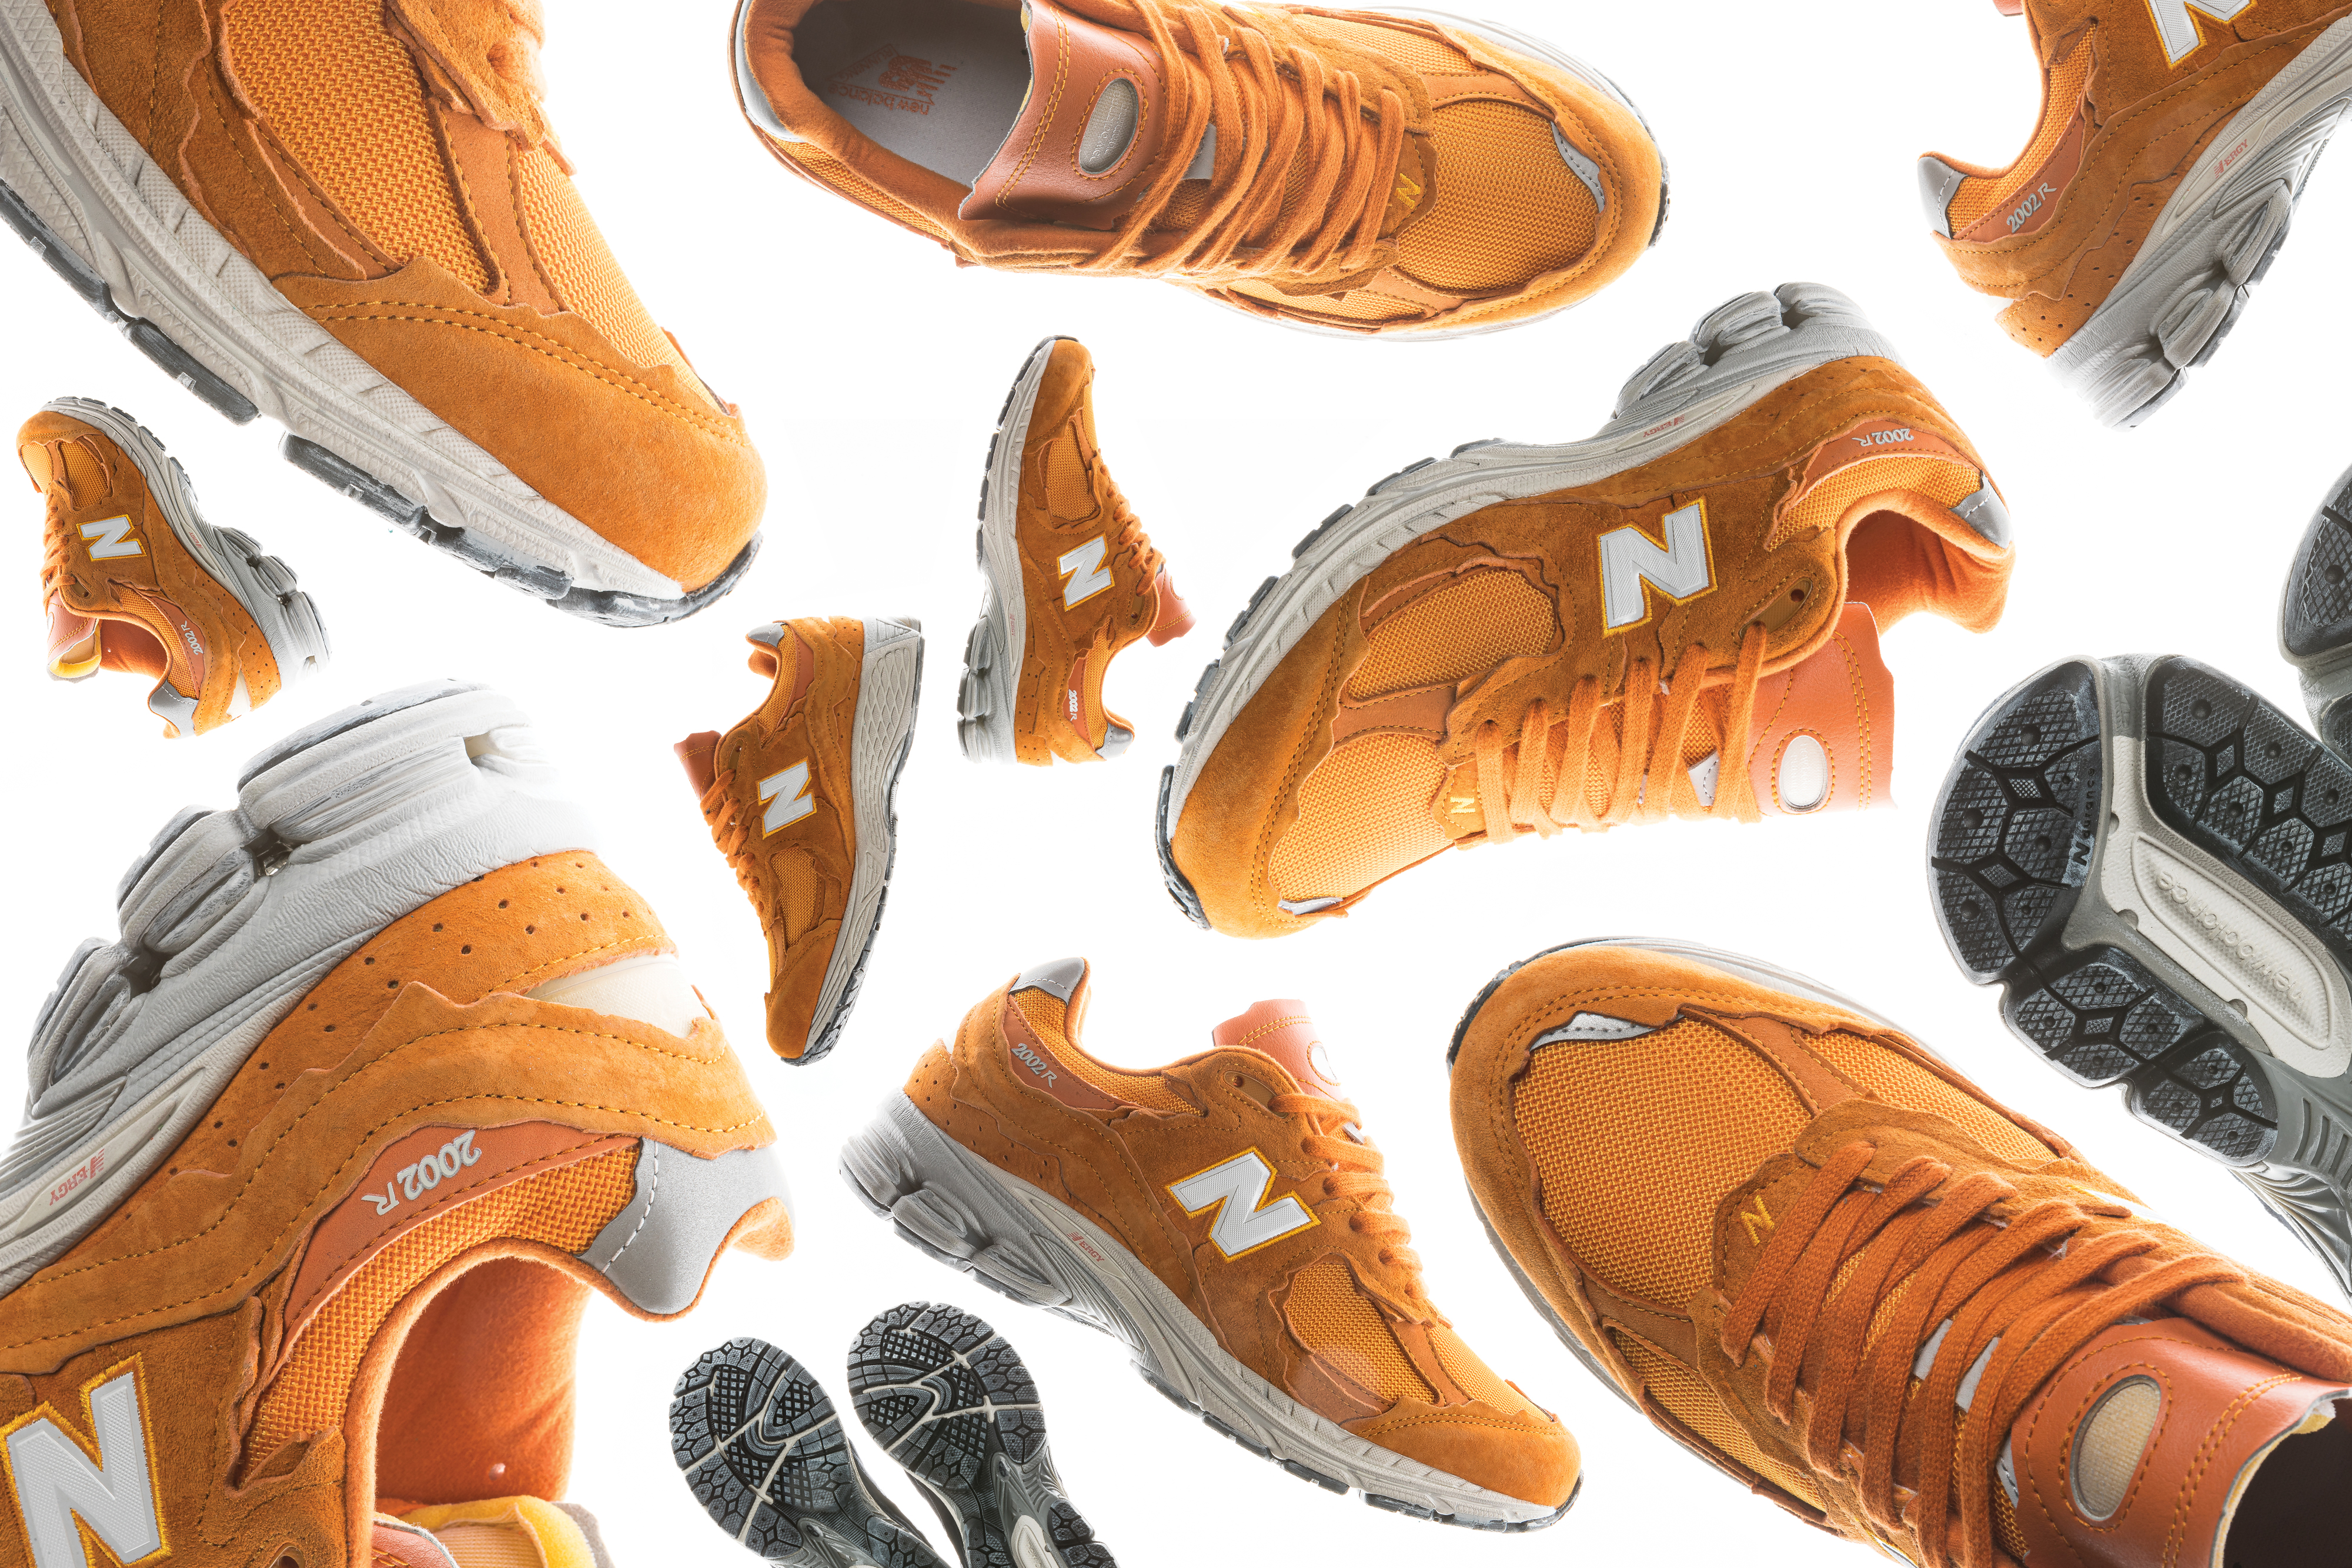 Up There Launches - New Balance Refined Futures + Protection Pack M2002RDD M2002RDE M2002RDF